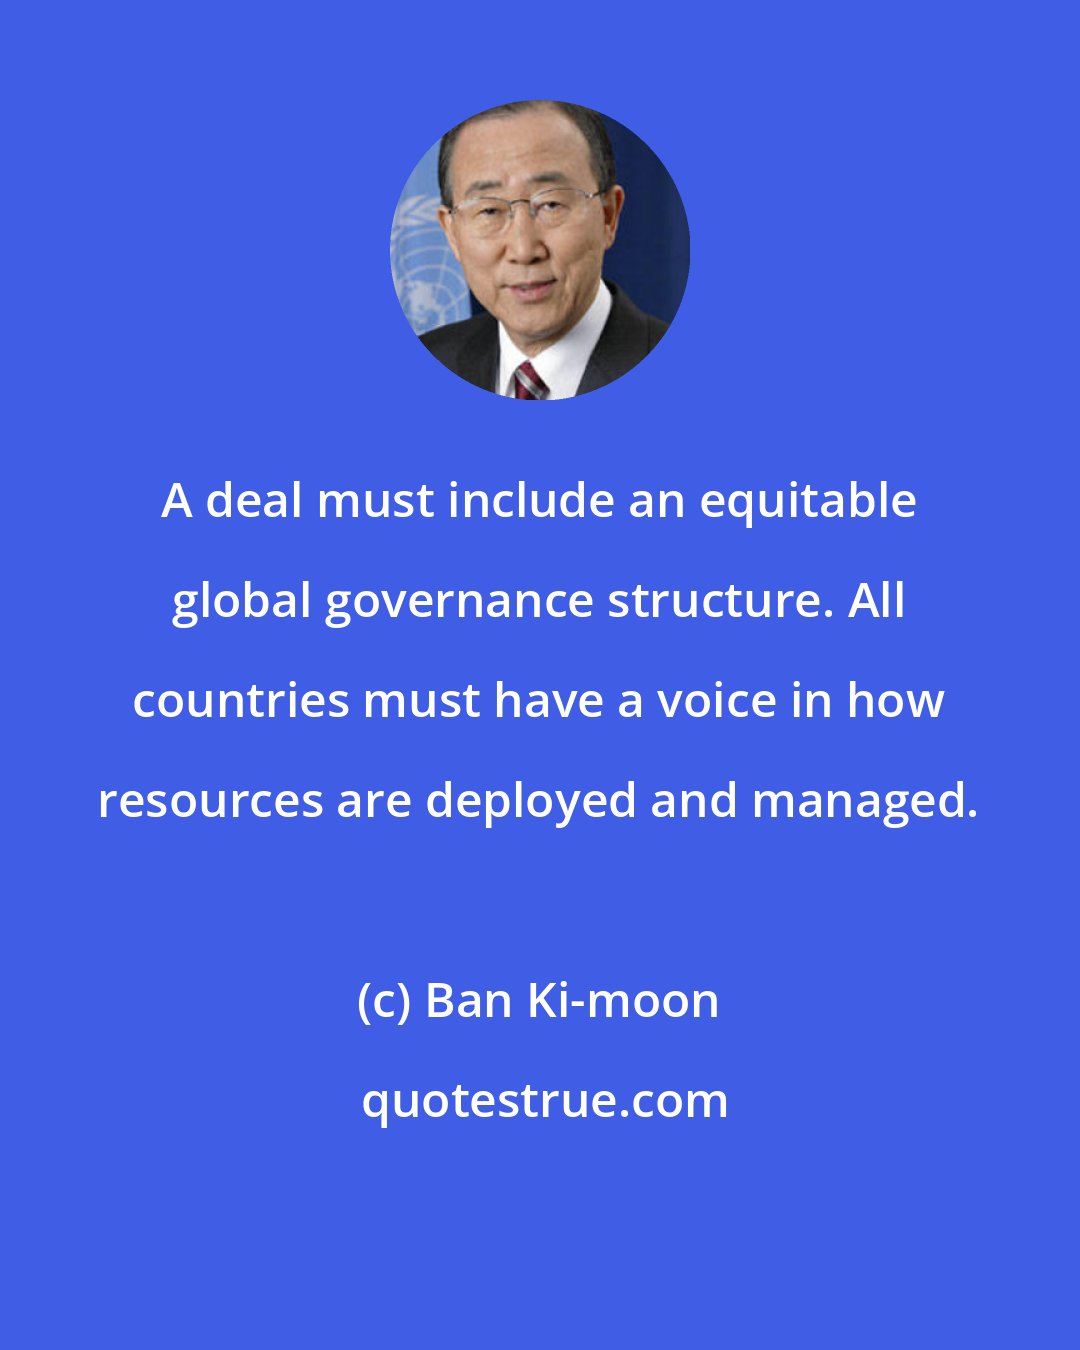 Ban Ki-moon: A deal must include an equitable global governance structure. All countries must have a voice in how resources are deployed and managed.